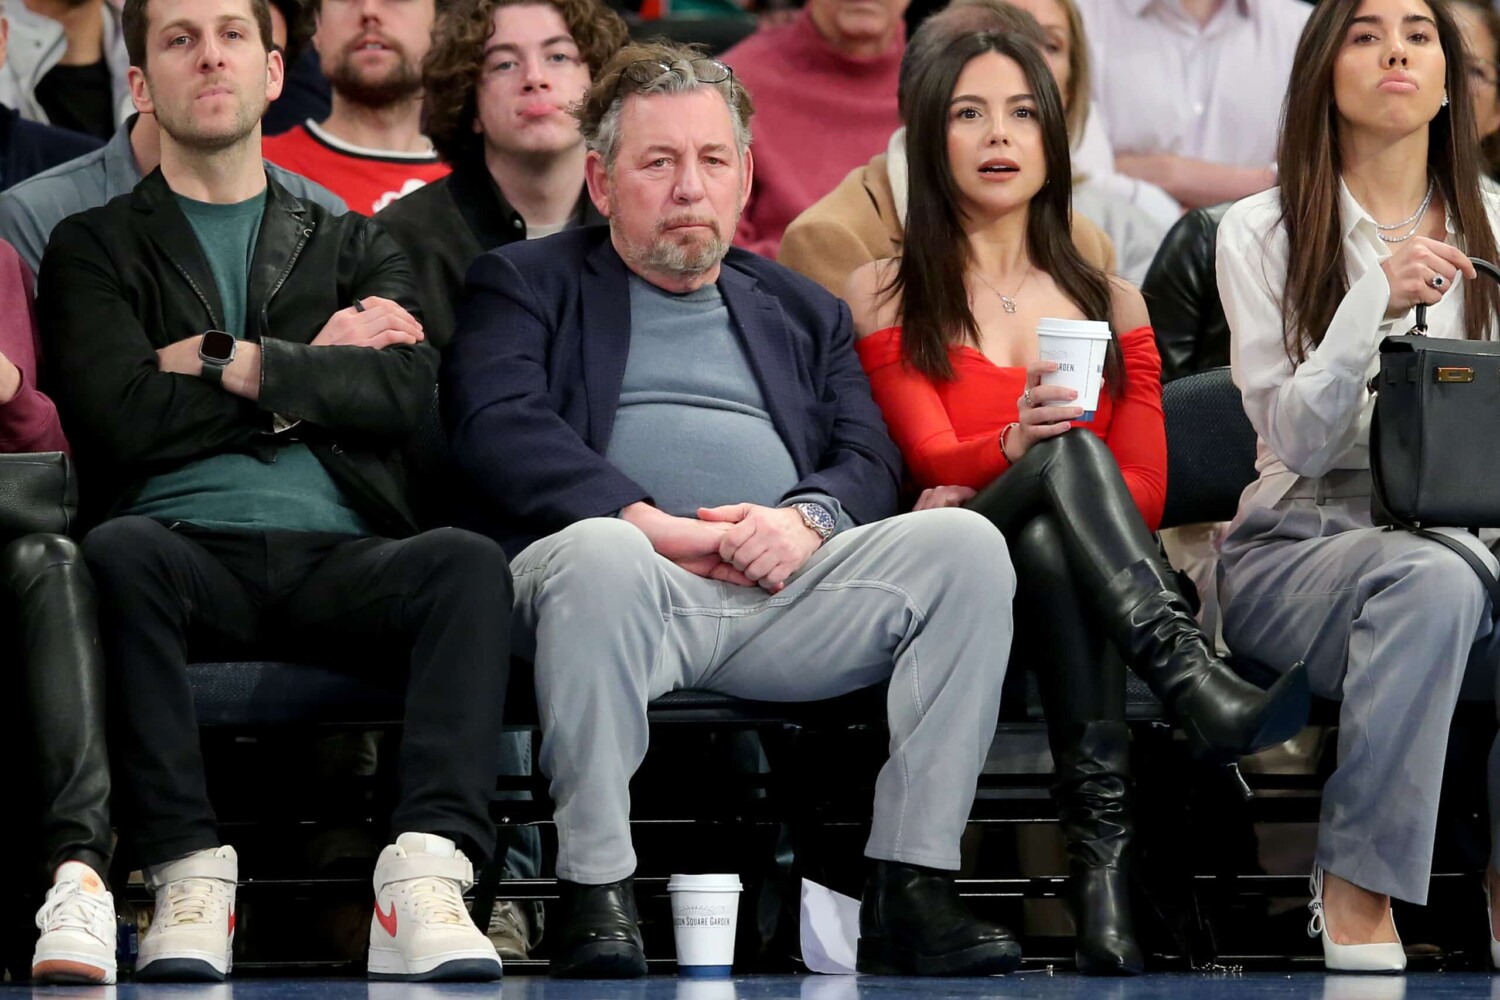 New York Knicks owner James Dolan sitting courtside at a Knicks game at Madison Square Garden.